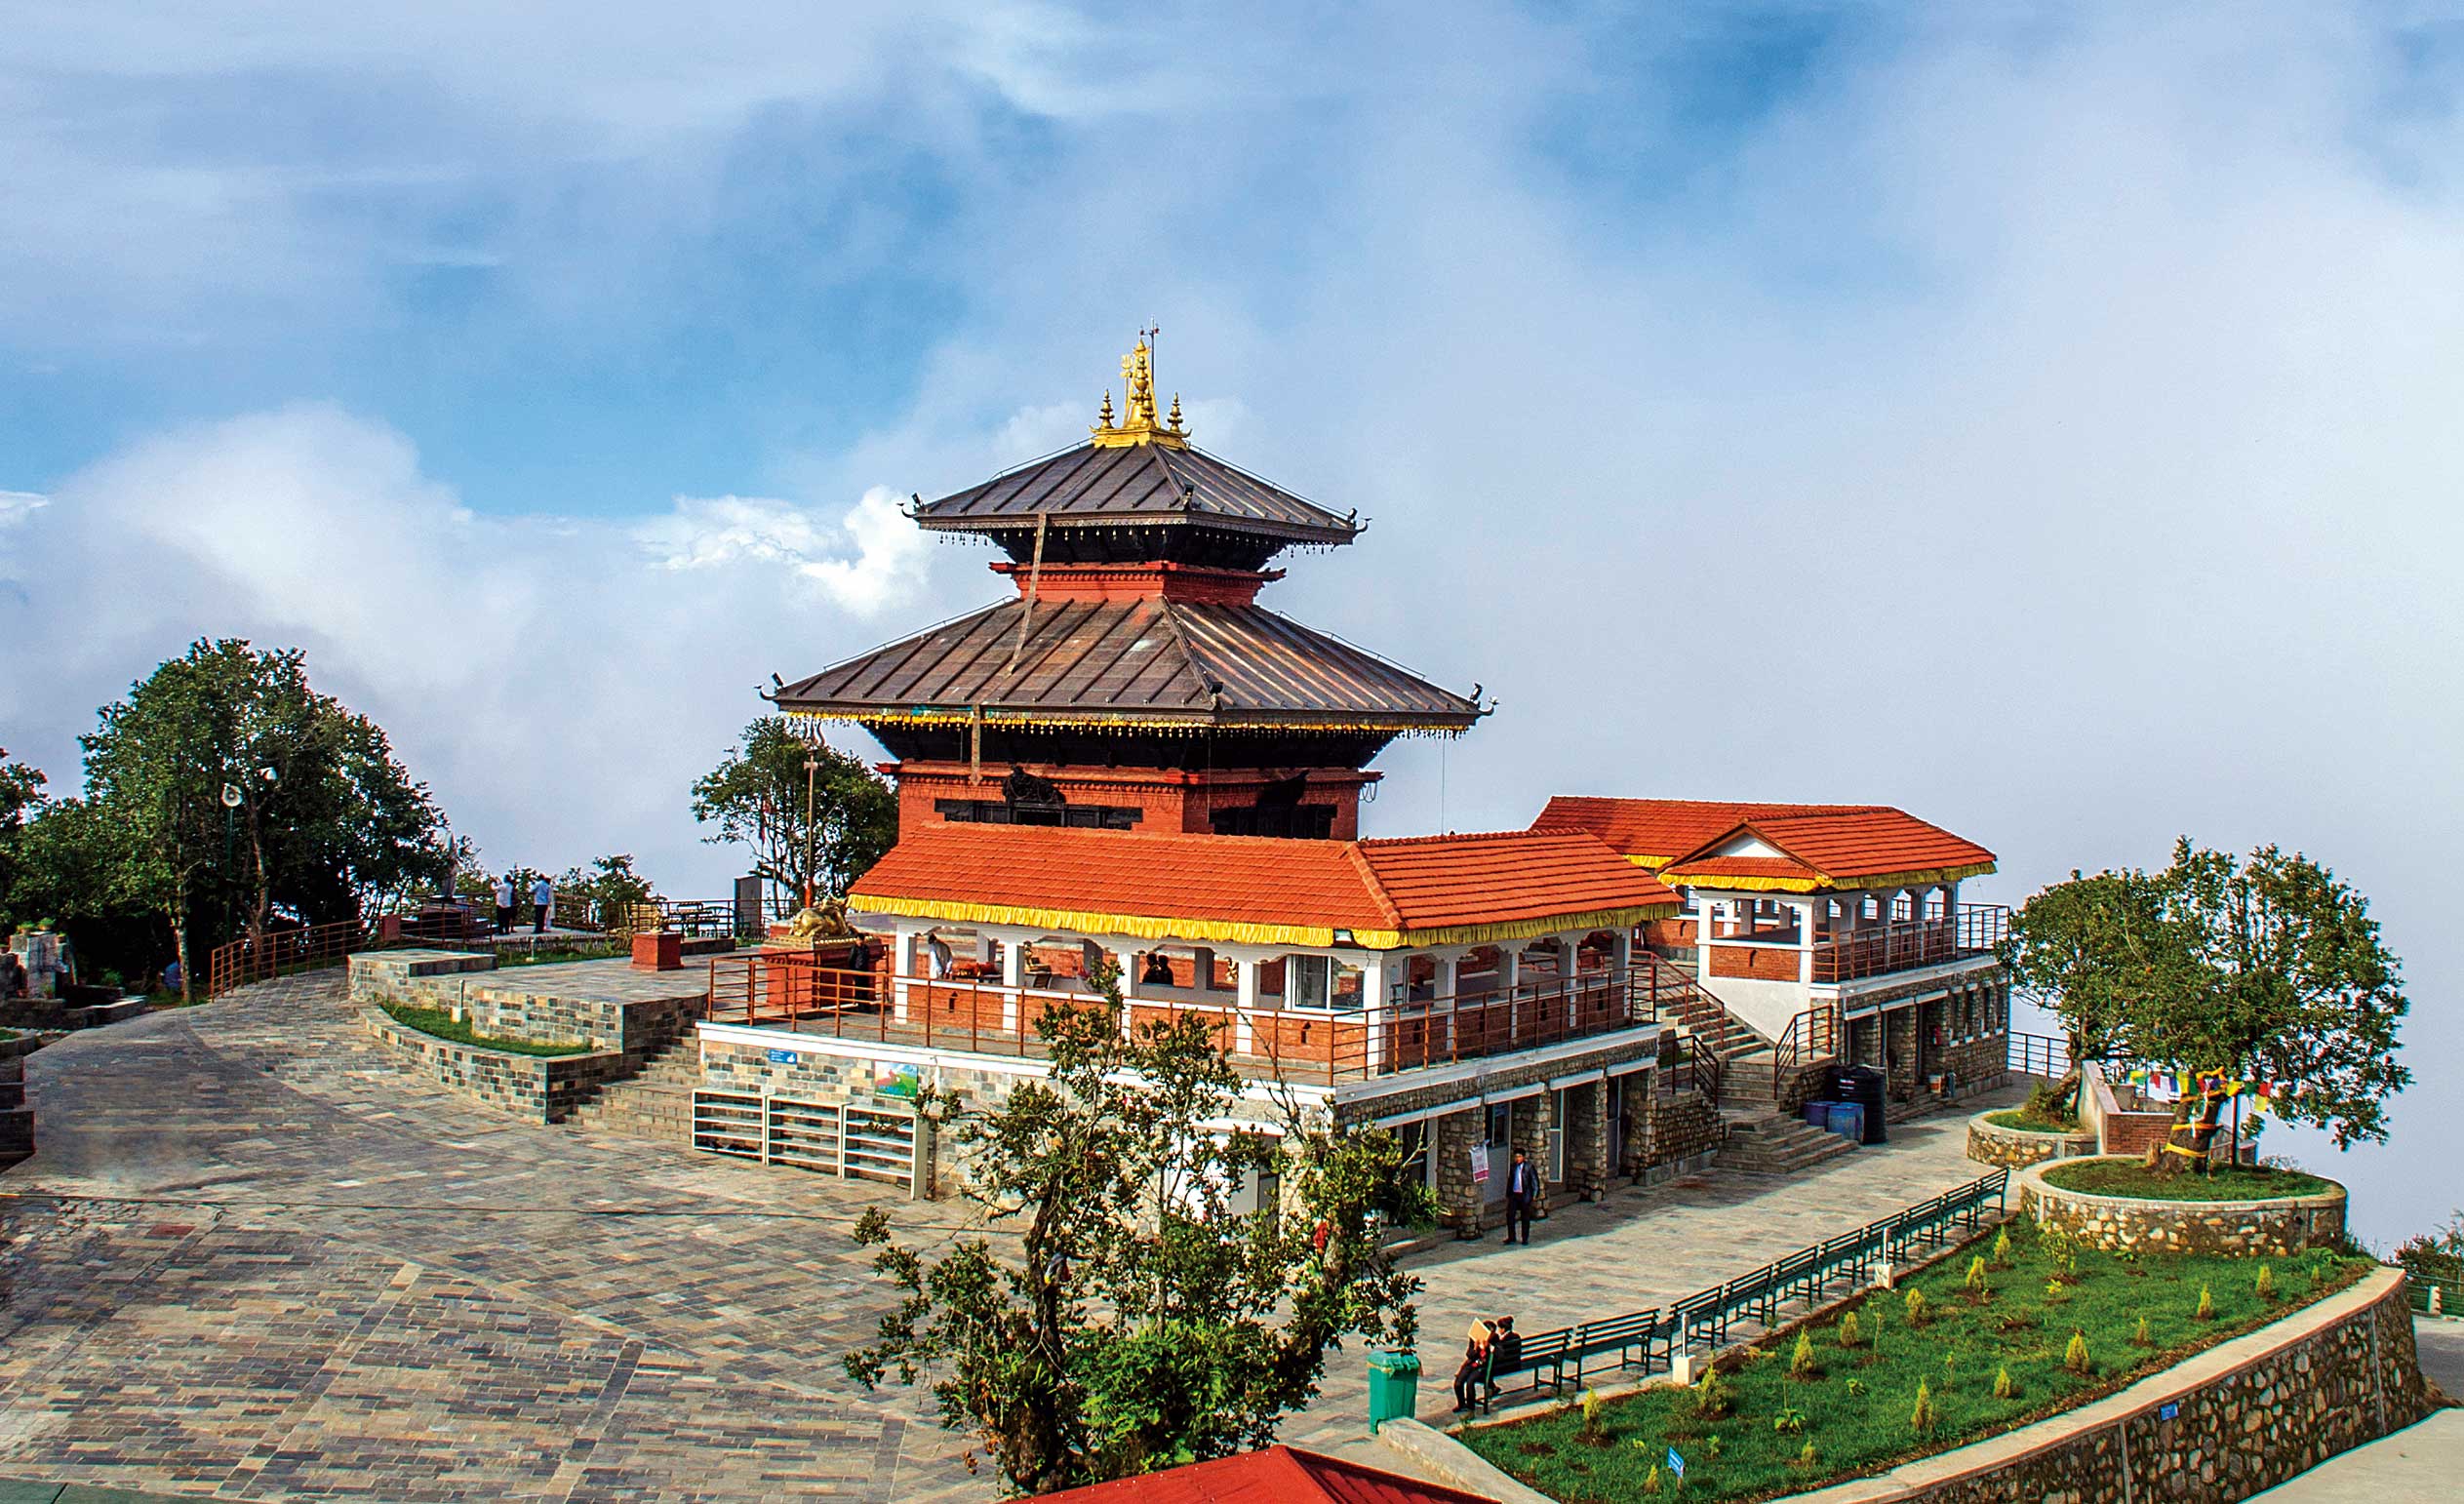 5 things to do during spring time in Nepal